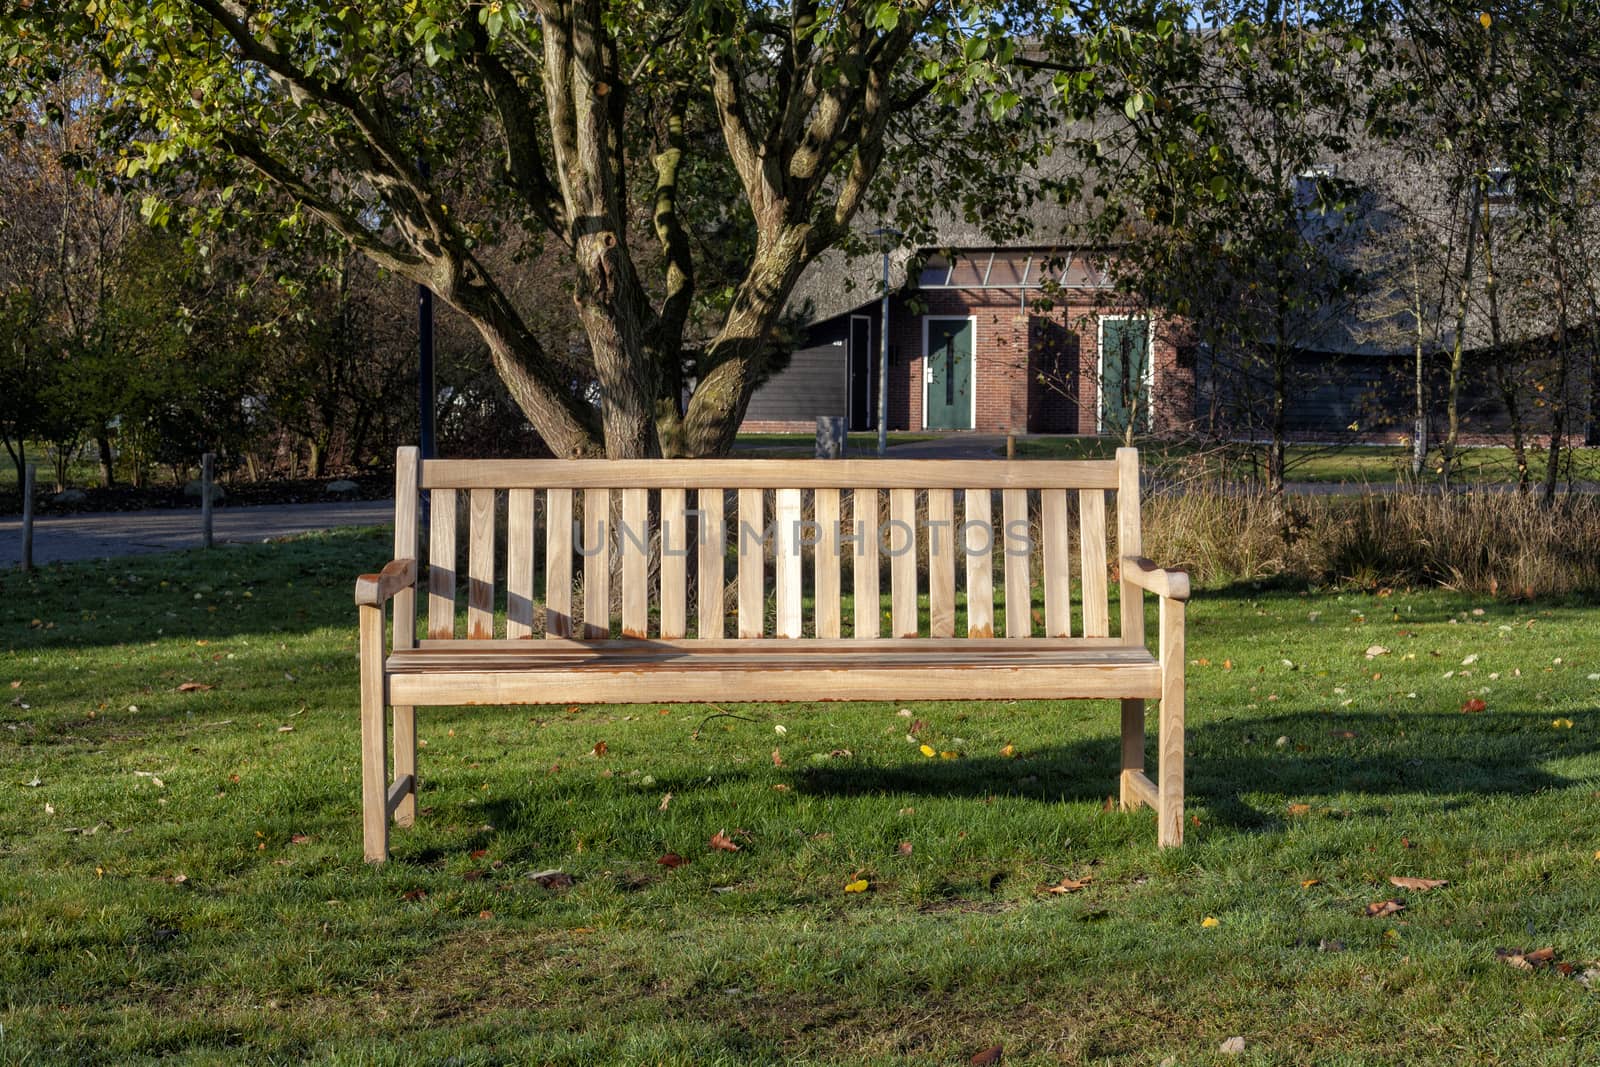 Bench in the park in autumn season - Image